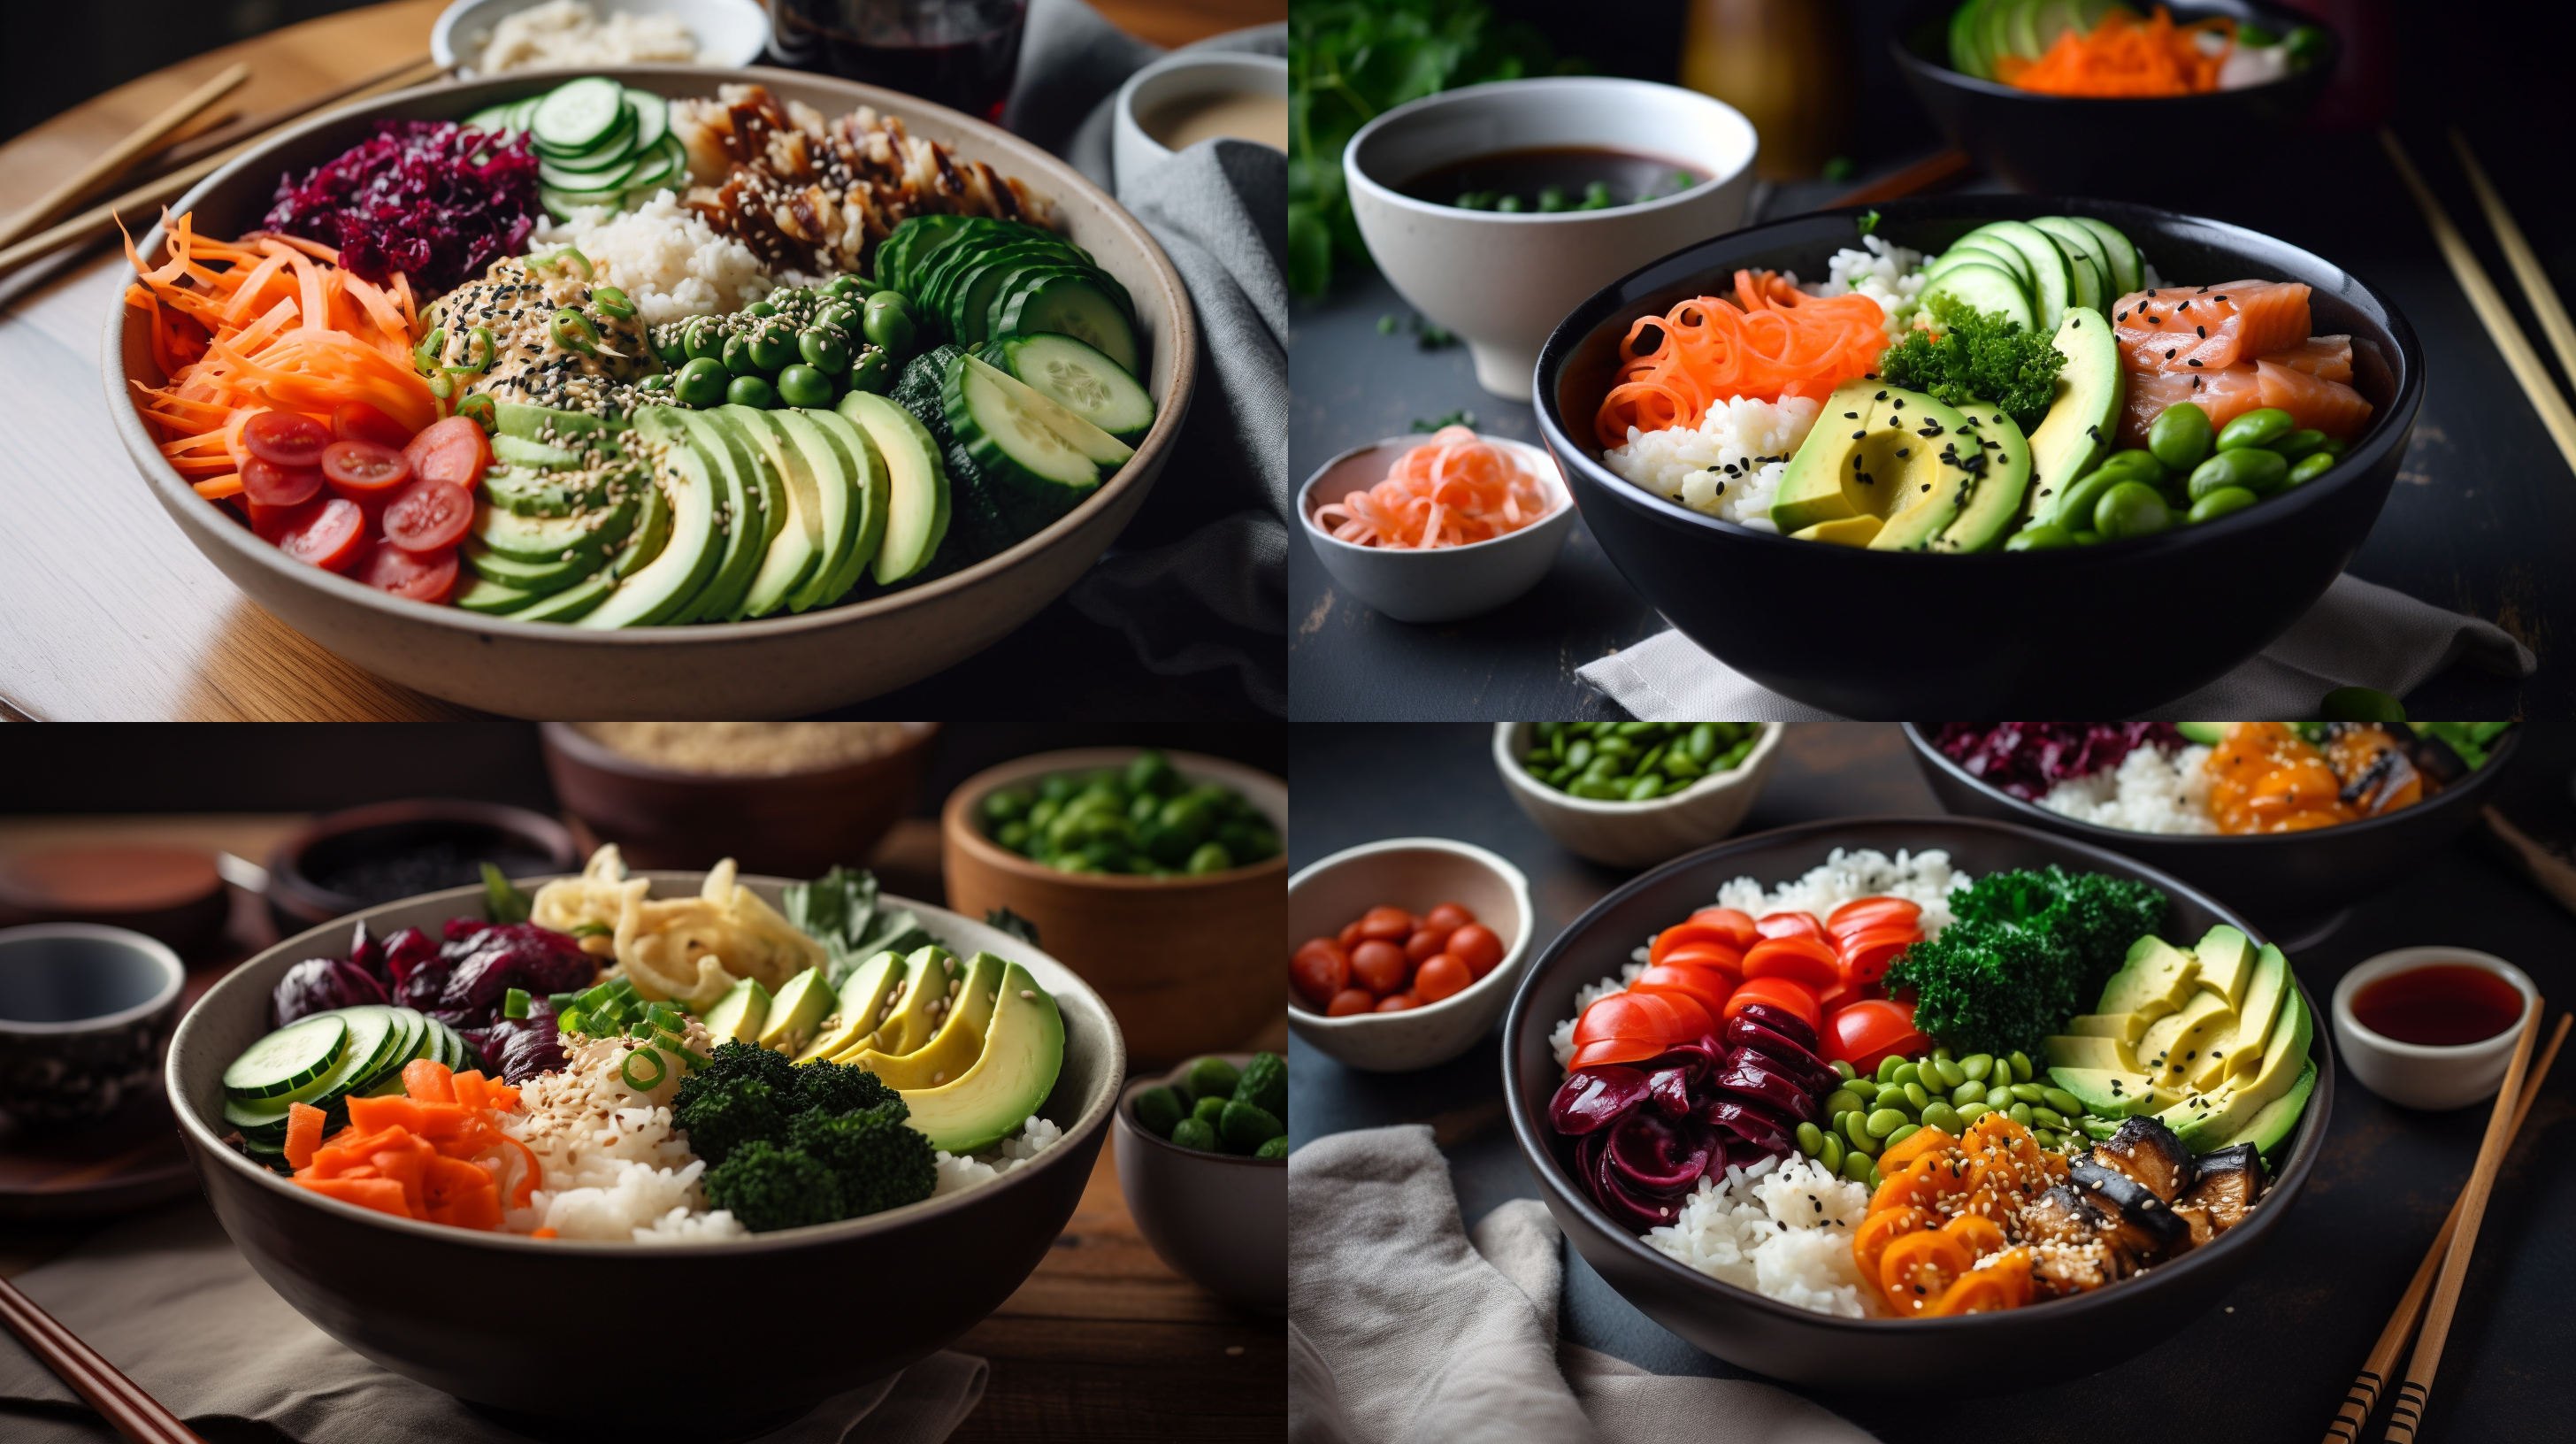 The Deconstructed Vegetable Sushi Bowl